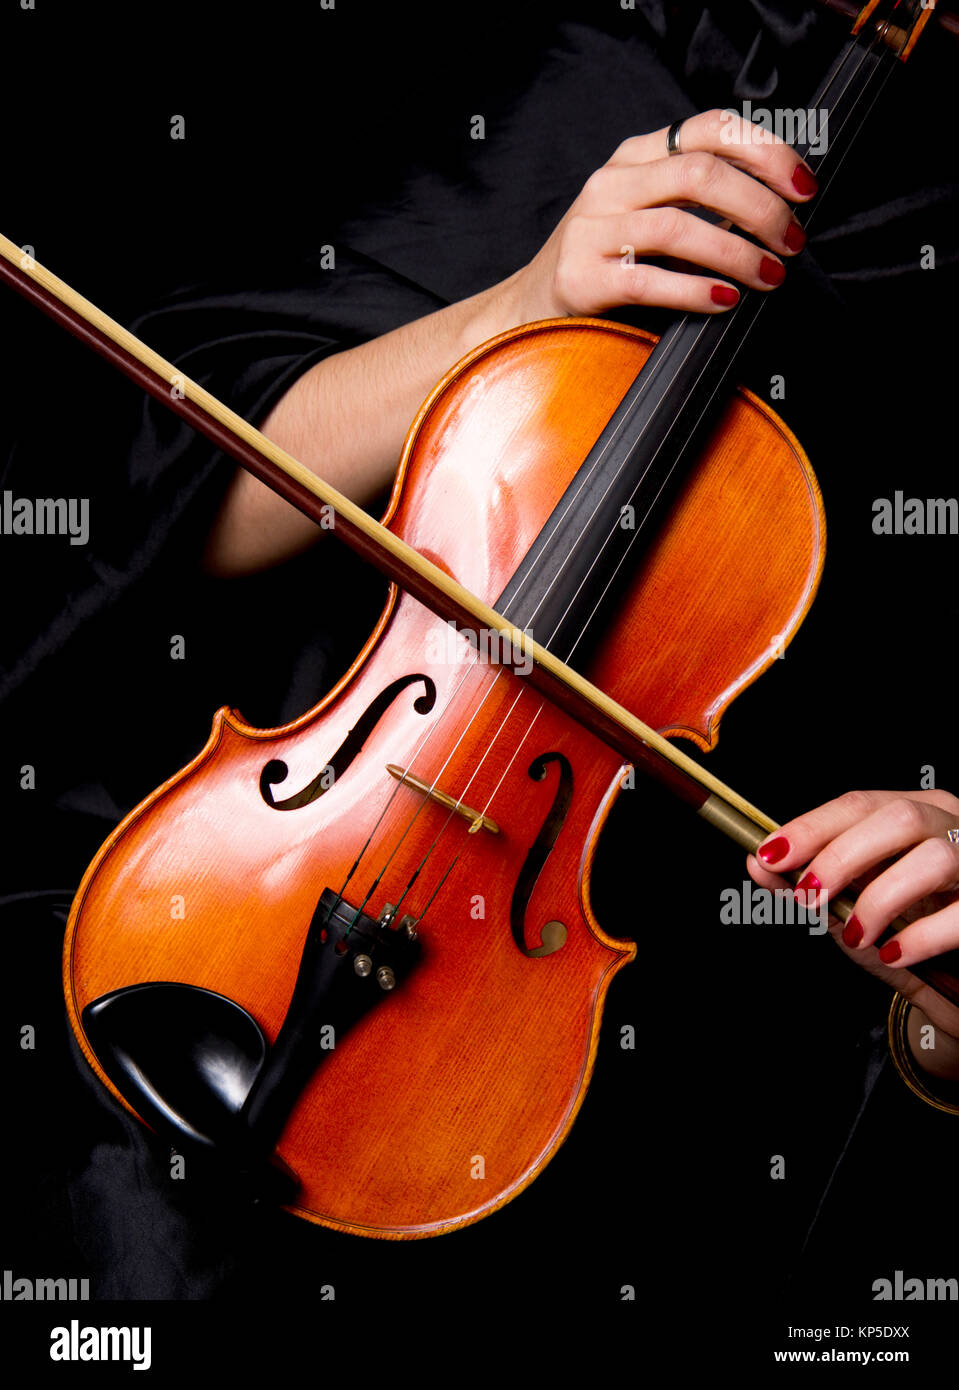 Violinist Holds Bow Across Saturated Musical Violin Stock Photo